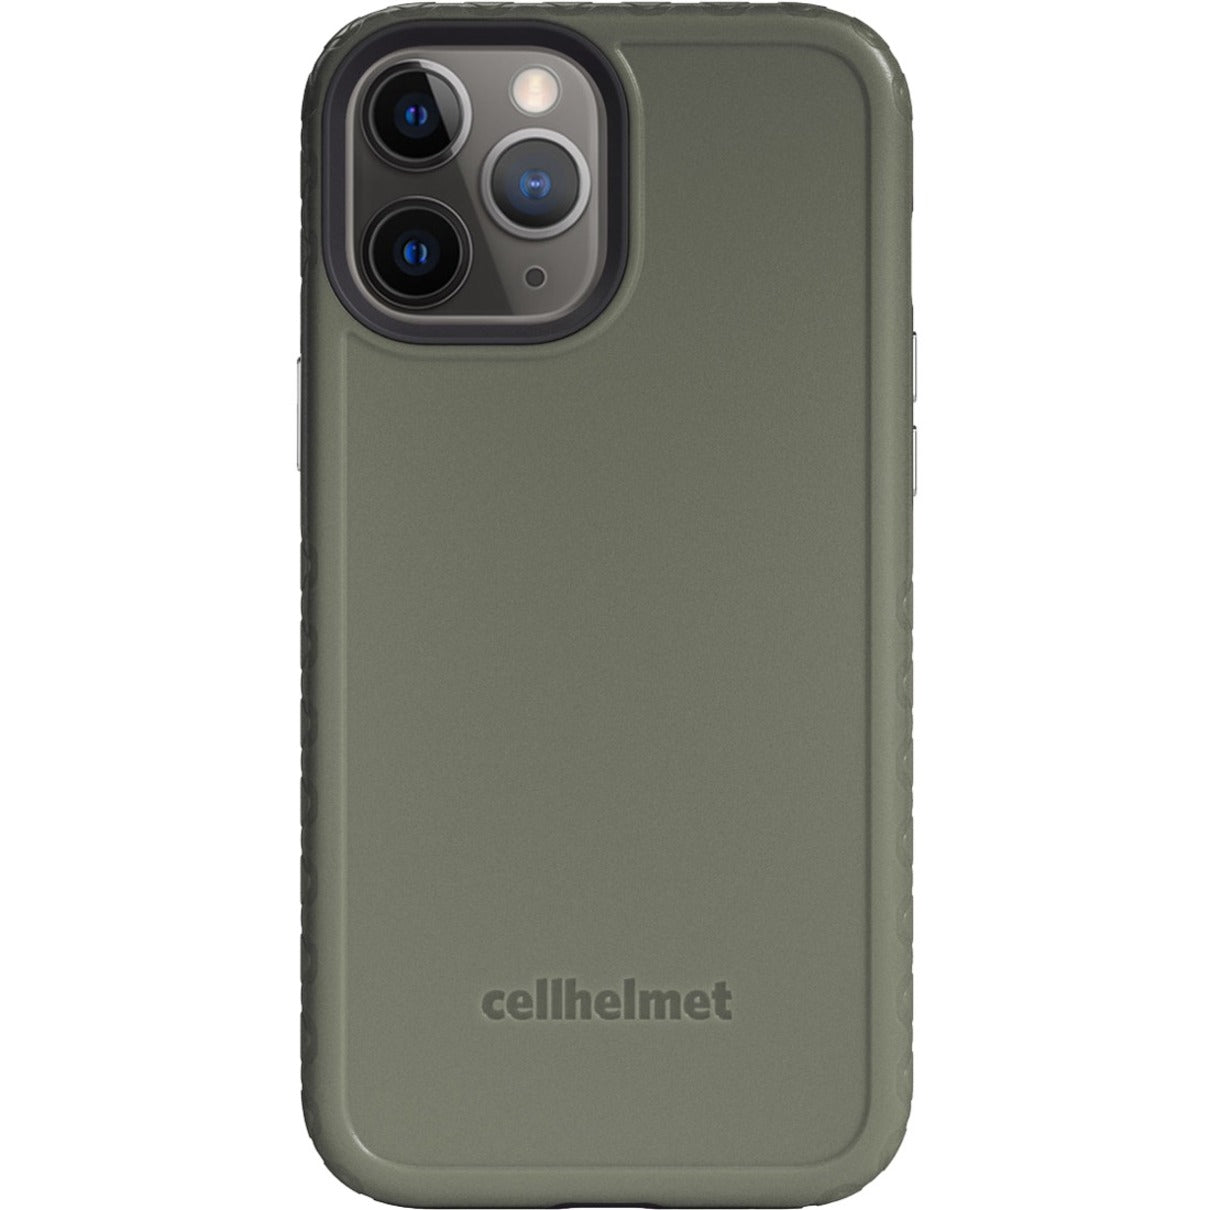 Cellhelmet Fortitude Series for iPhone 12 Pro Max - Olive Drab Green [Discontinued]